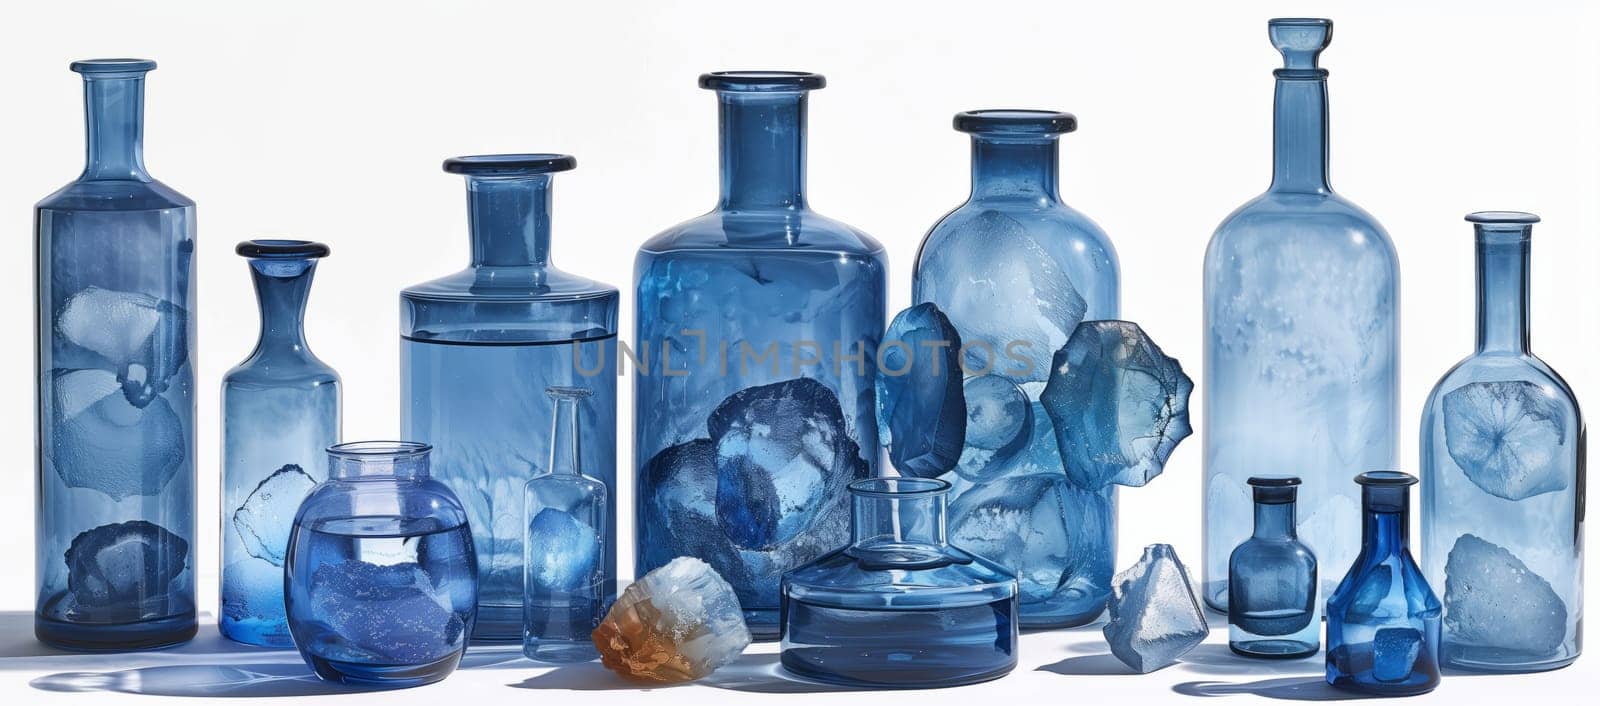 Group of electric blue glass bottles lined up on white background by richwolf